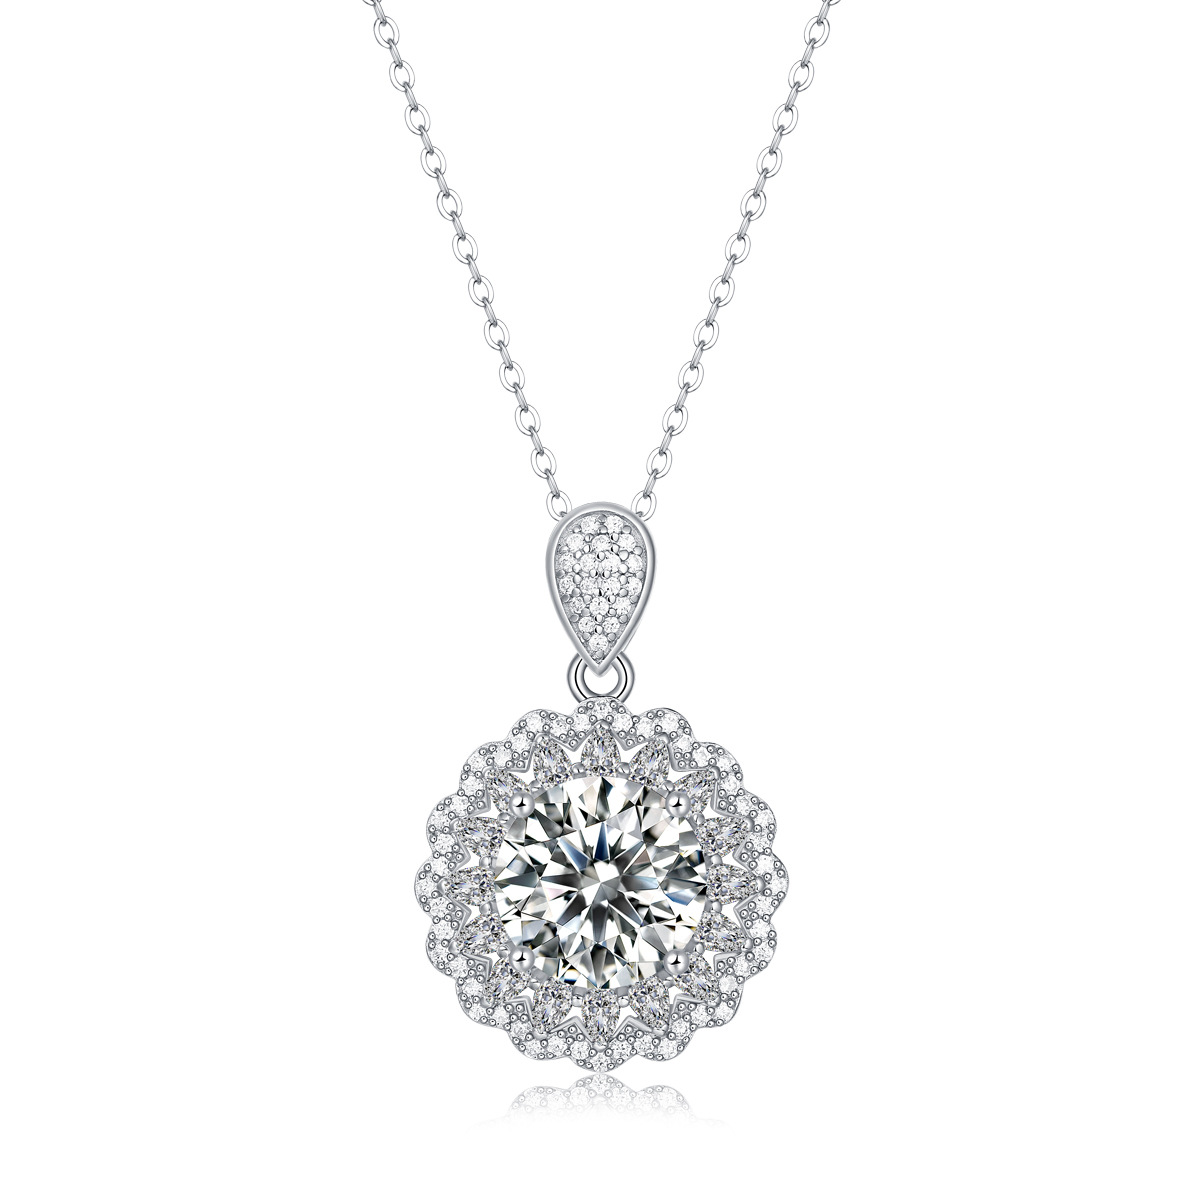 5 Ct Moissanite Diamond Sparkling Sterling Silver Necklace